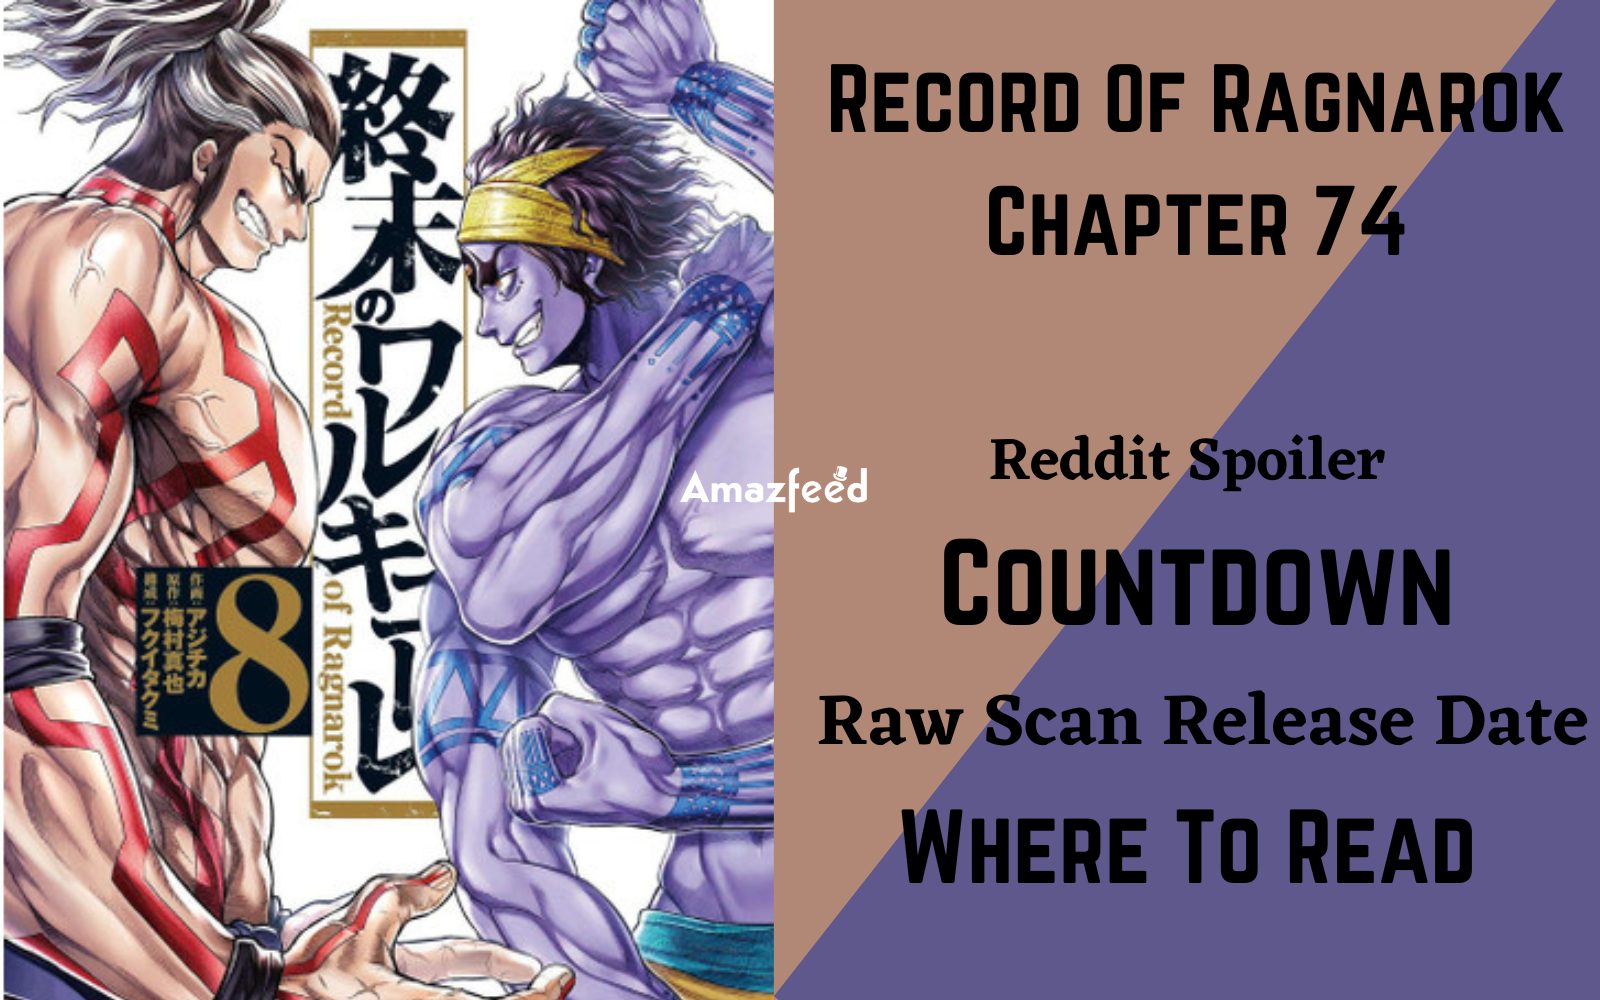 Tensei Shitara Slime Datta Ken Chapter 113 Spoiler, Raw Scan, Color Page,  Release Date » Amazfeed